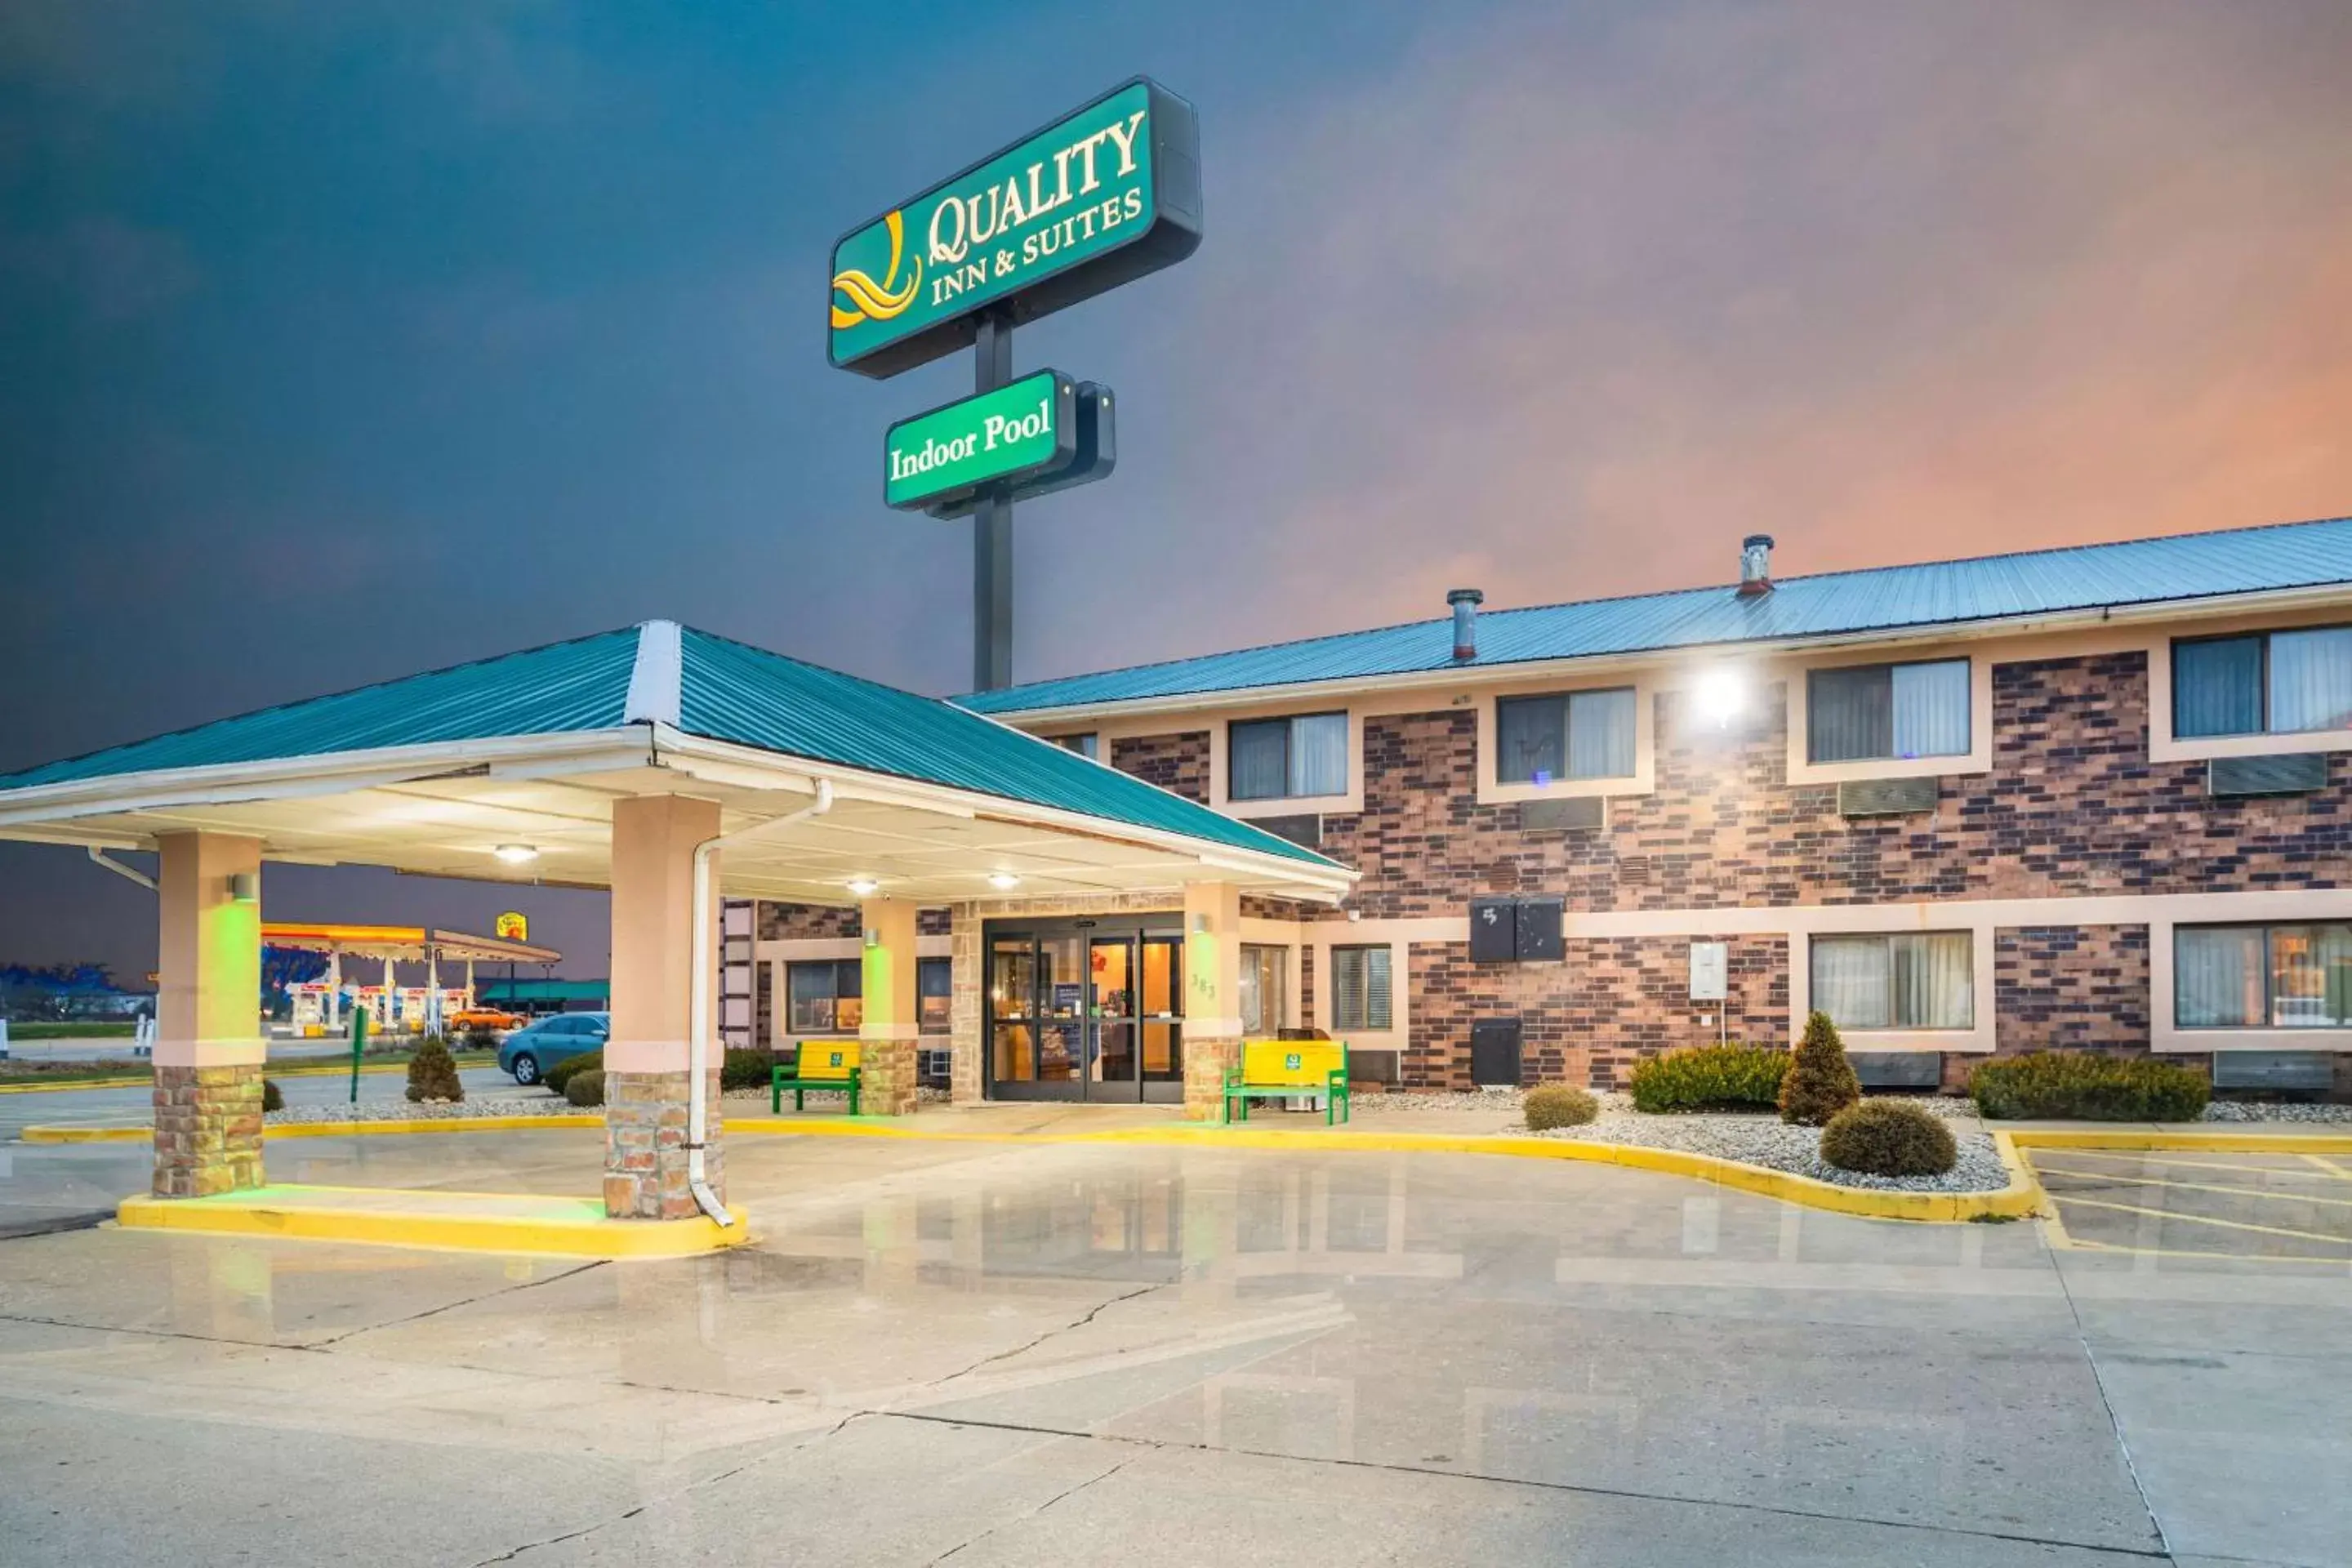 Property building in Quality Inn & Suites